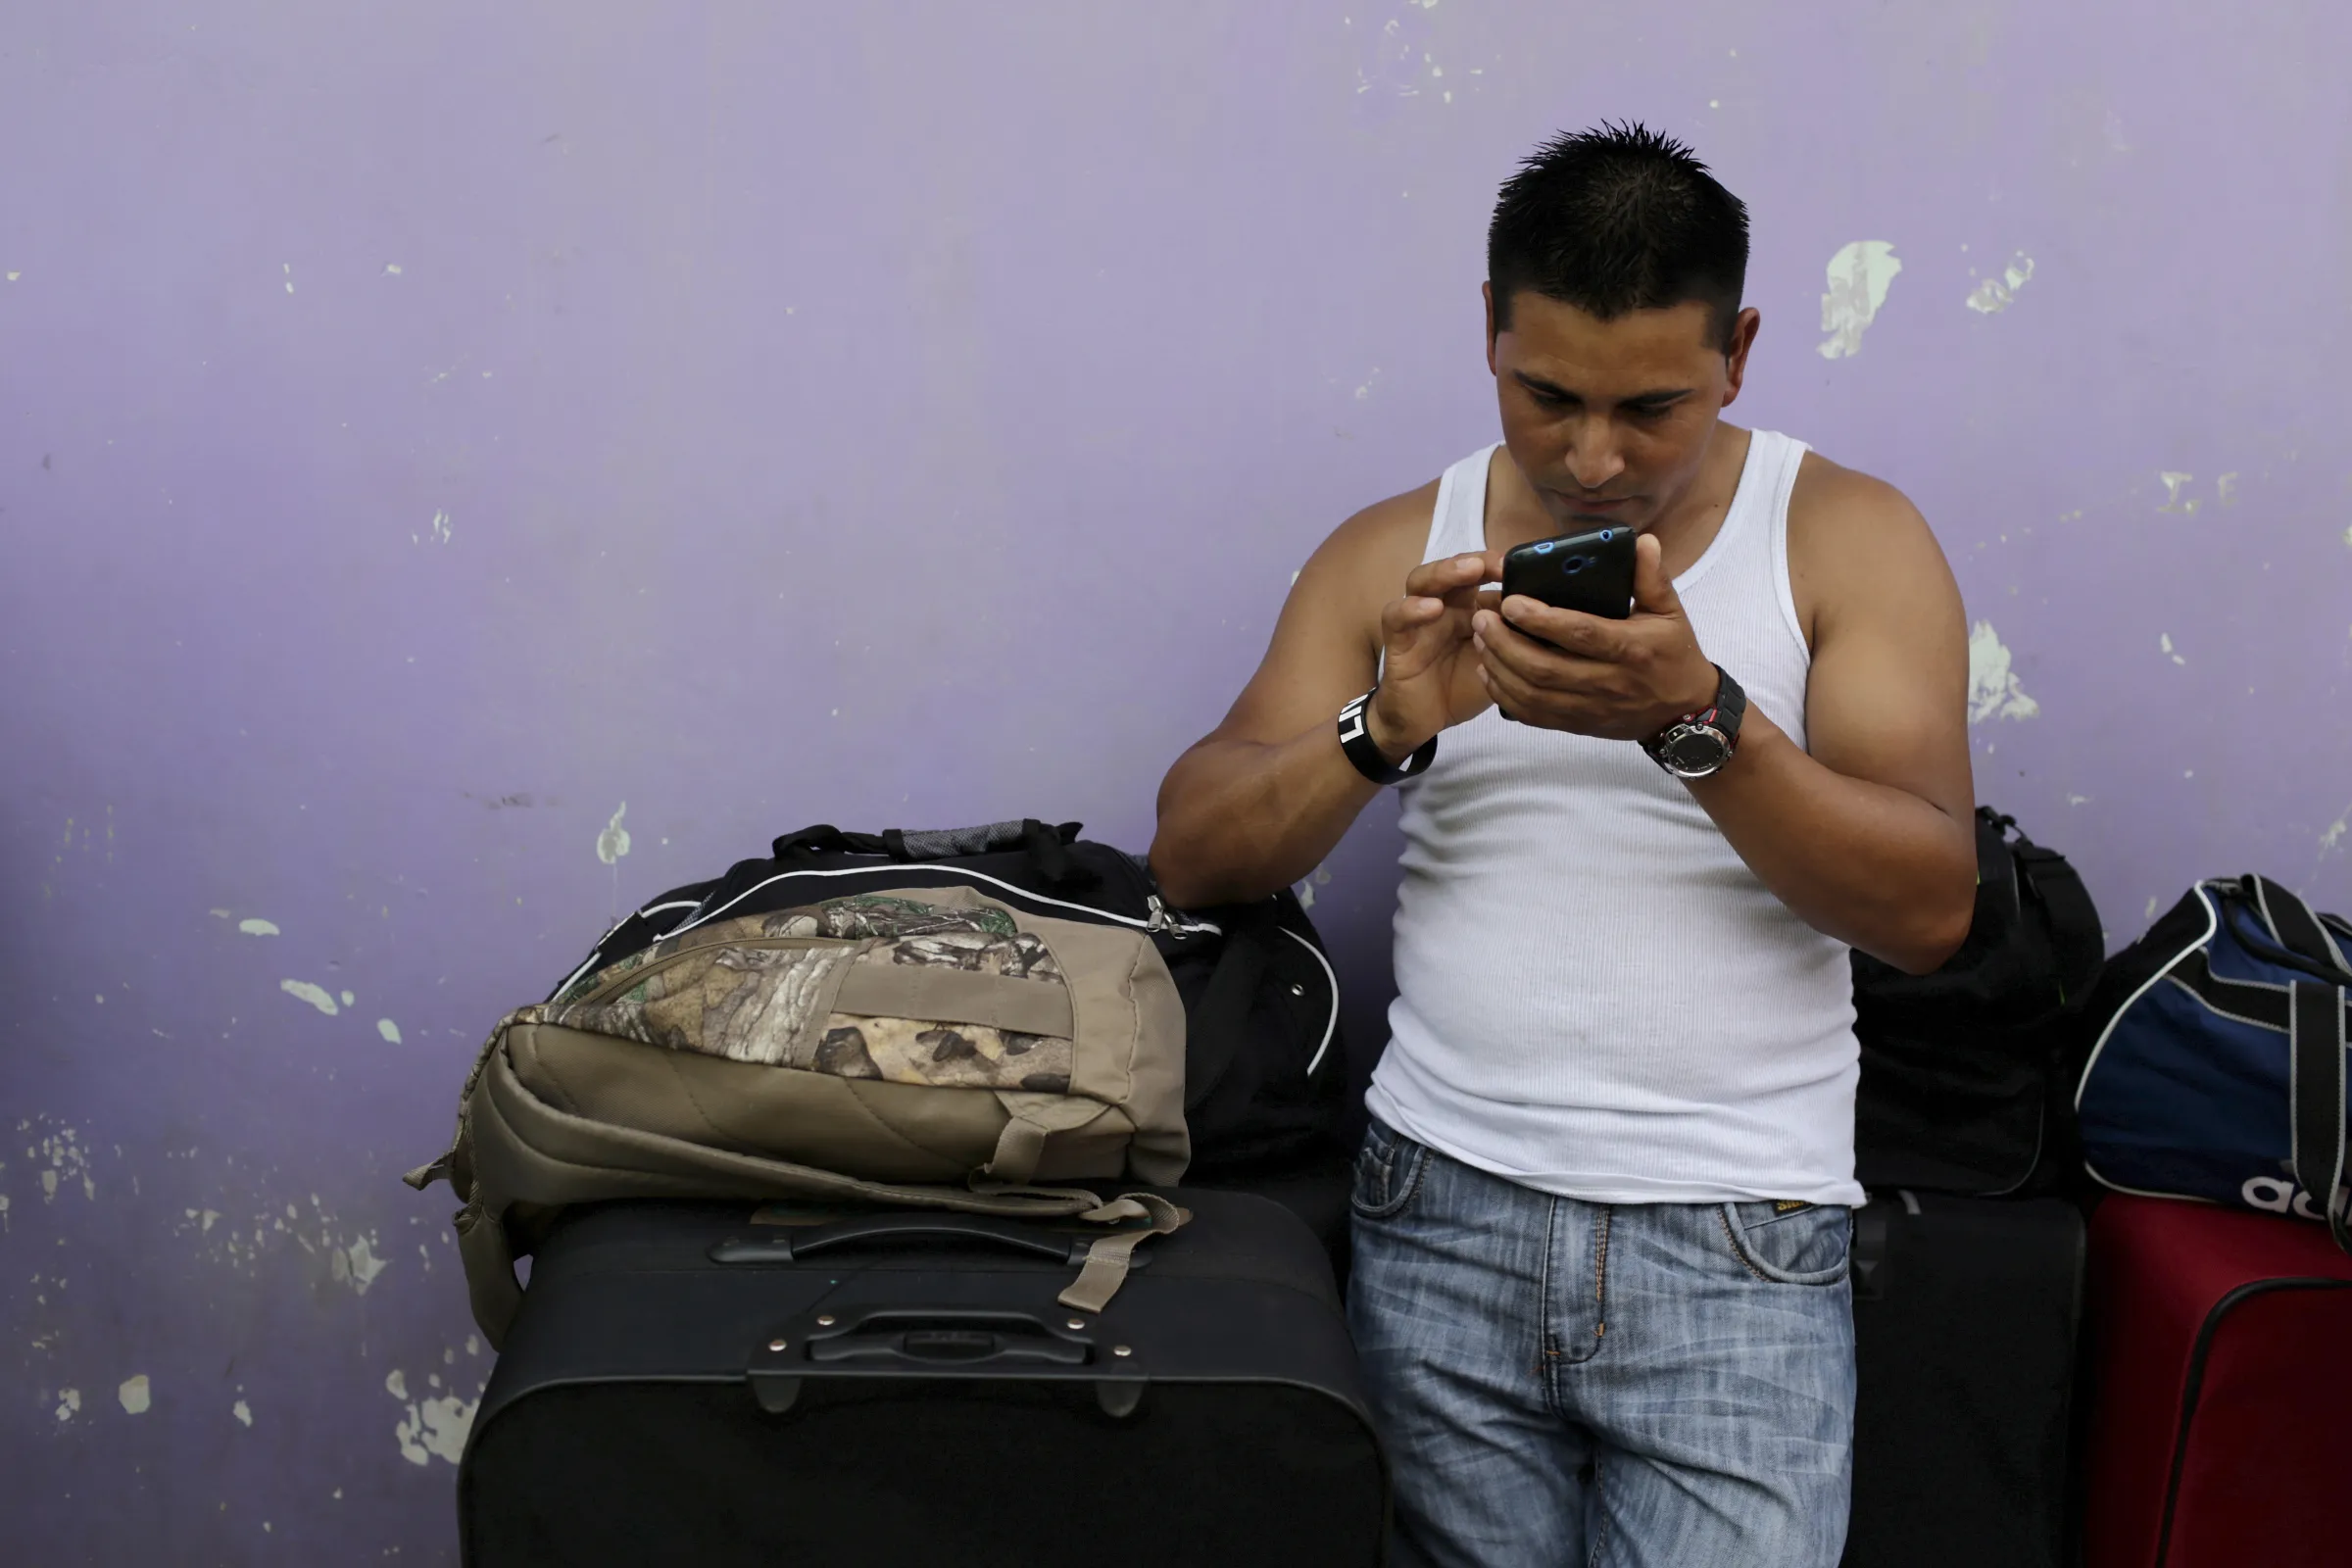 A man checks his phone as he leans against a pile of bags in front of a purple wall